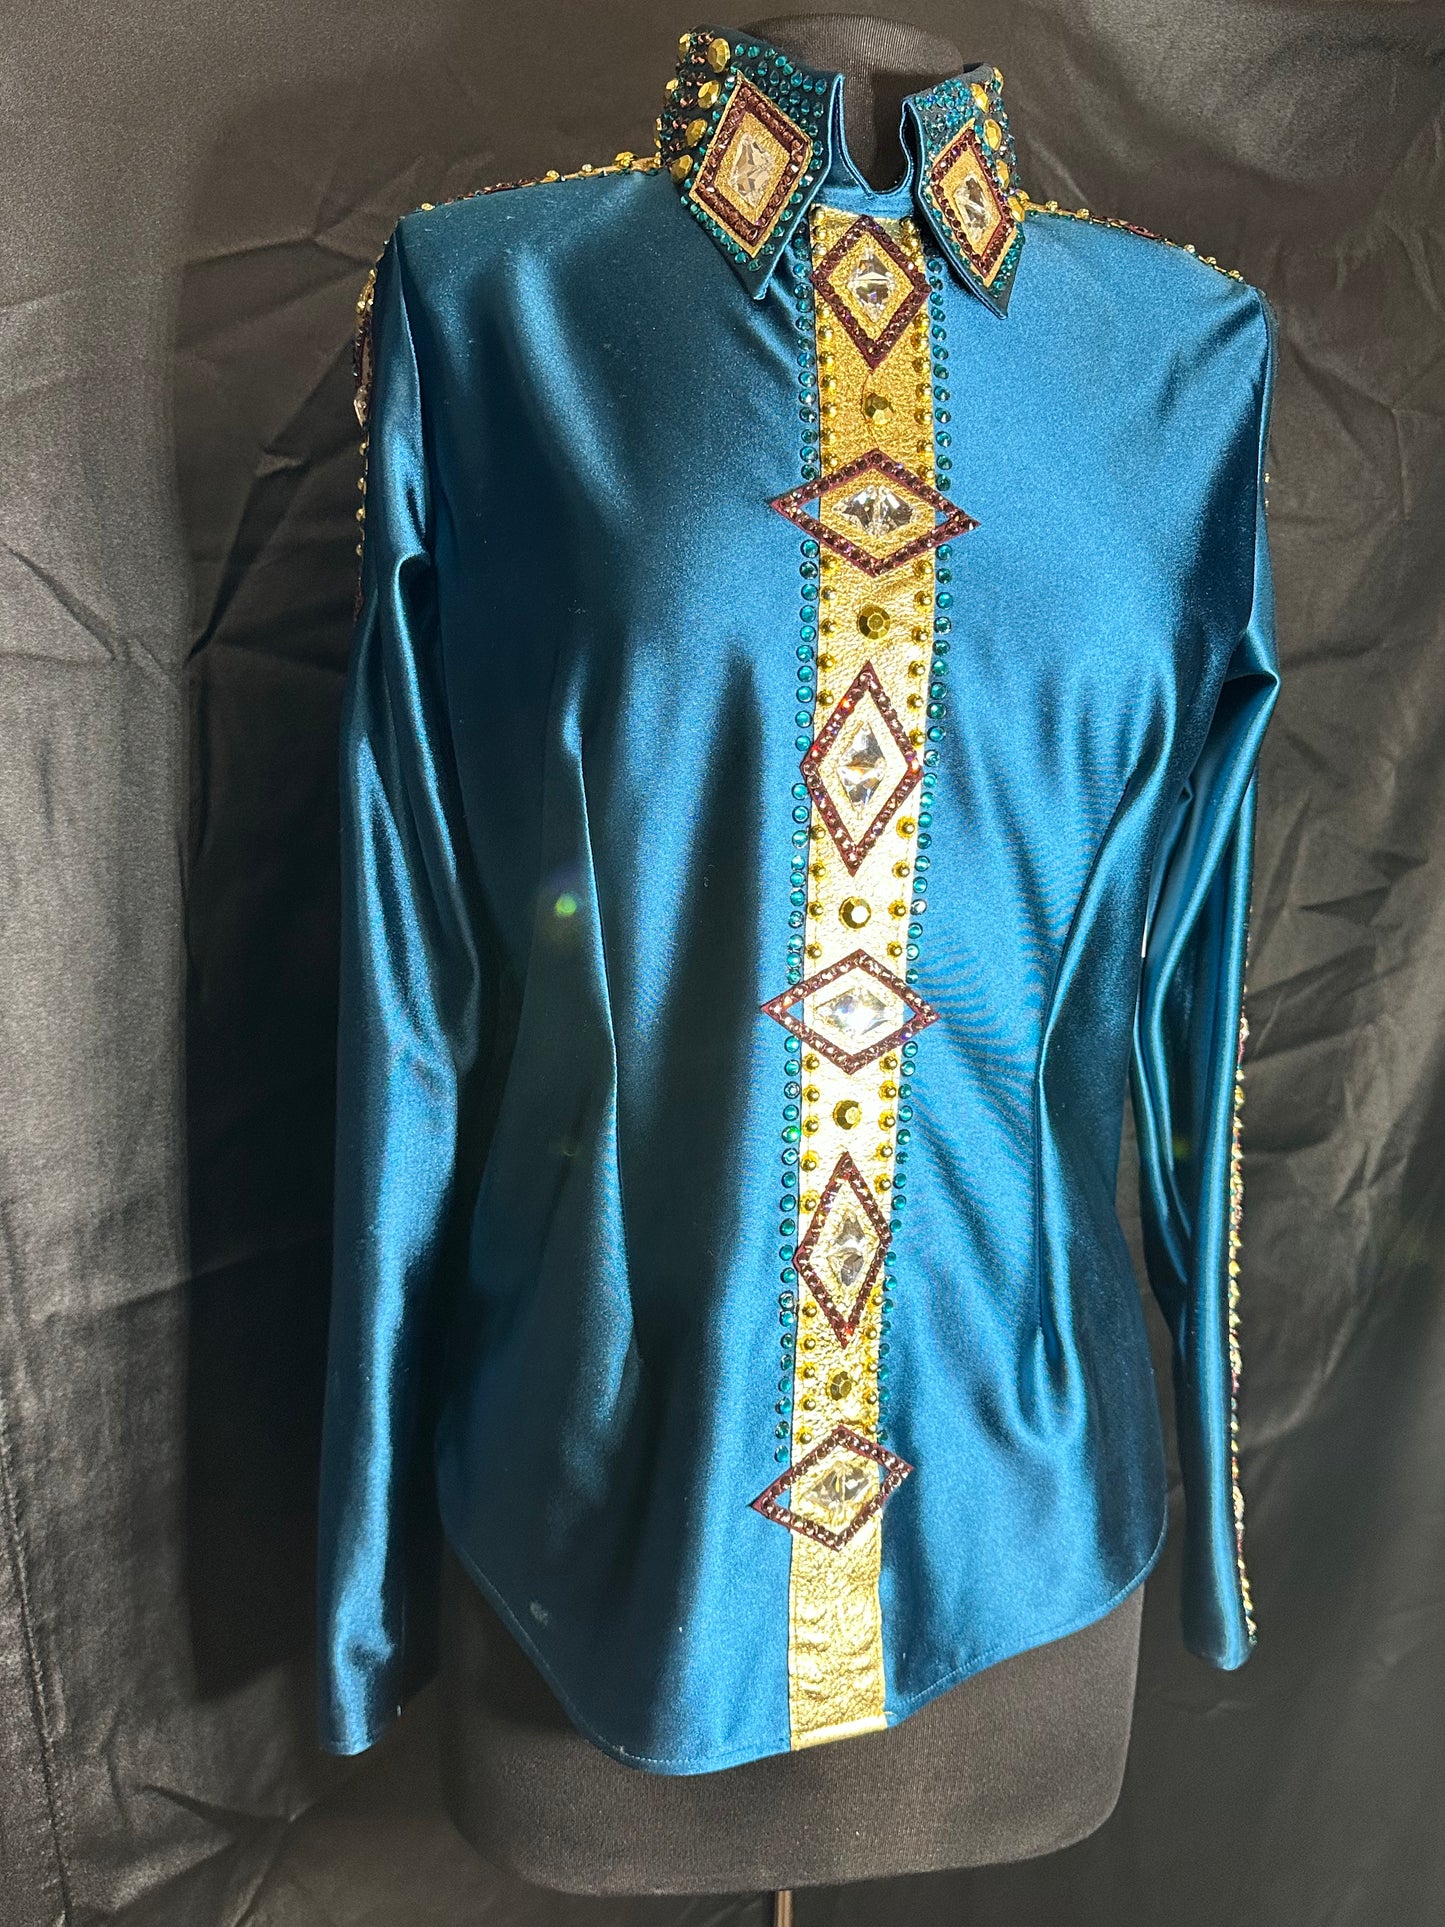 Size large back zip day shirt dark teal and golds